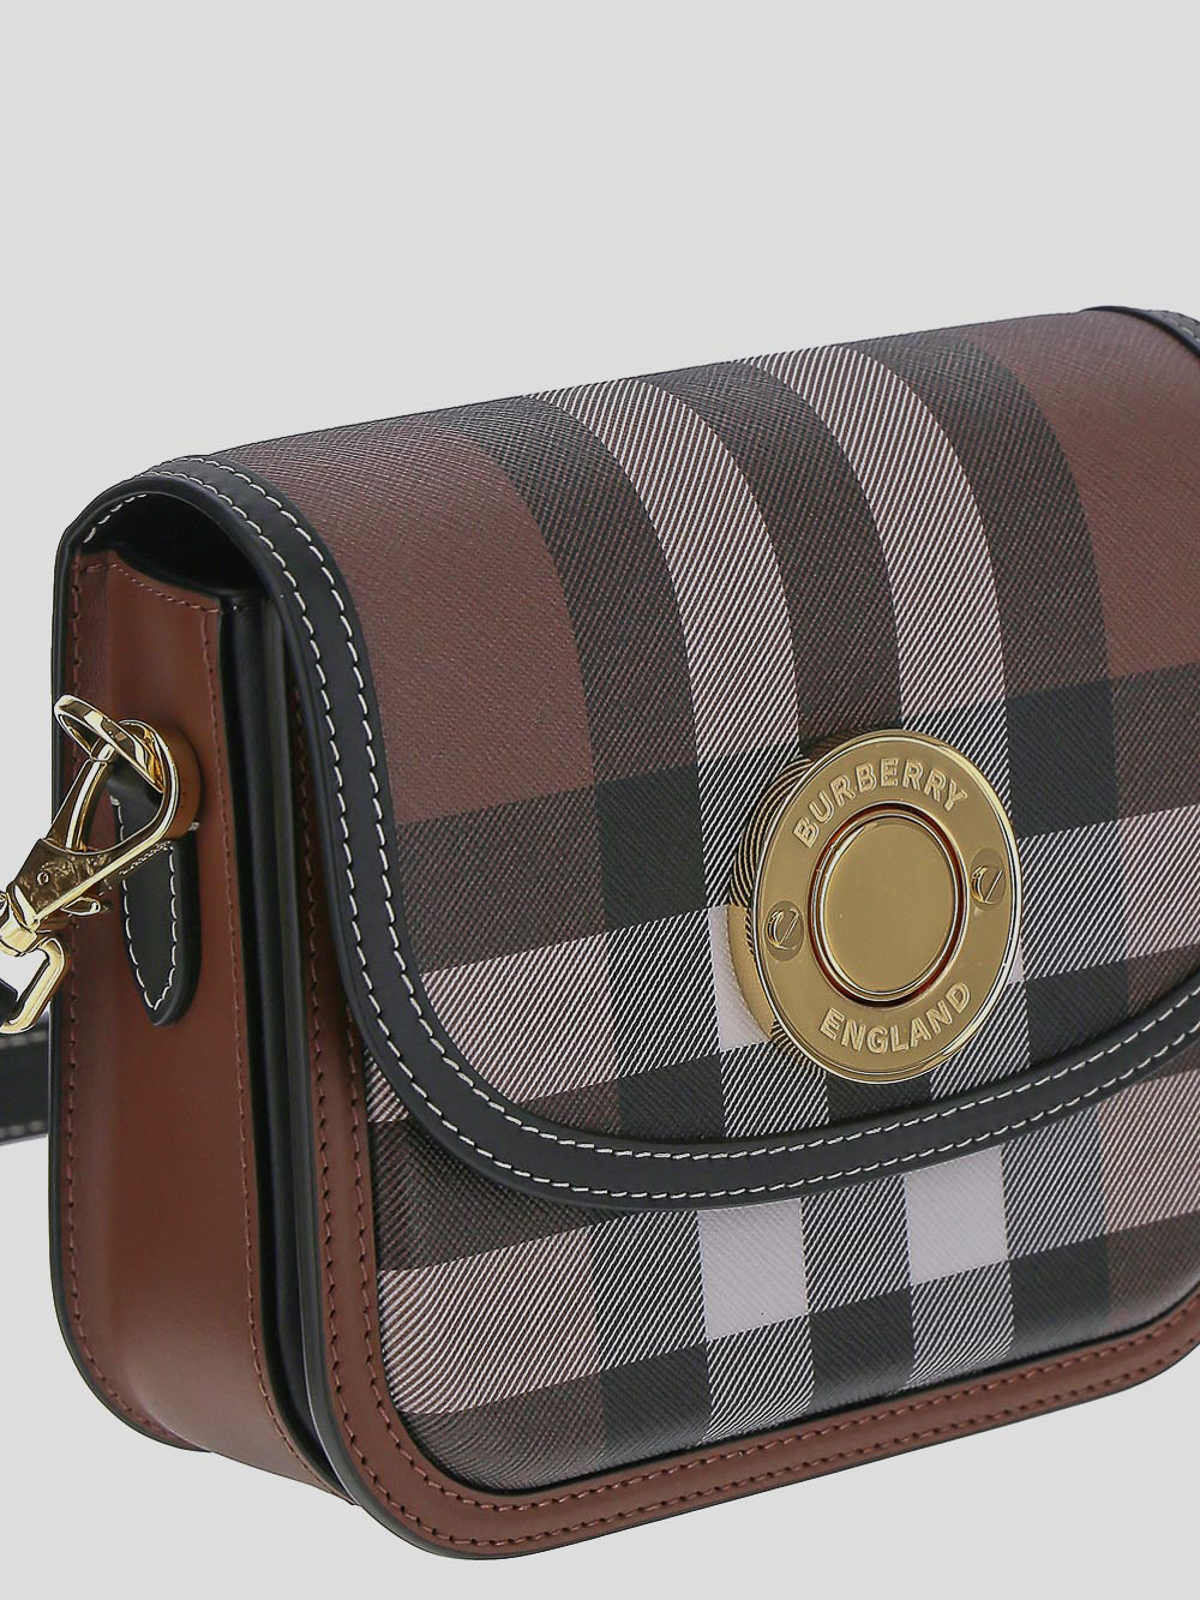 Burberry sale: handbags up to 40% off - Global Fashion Report